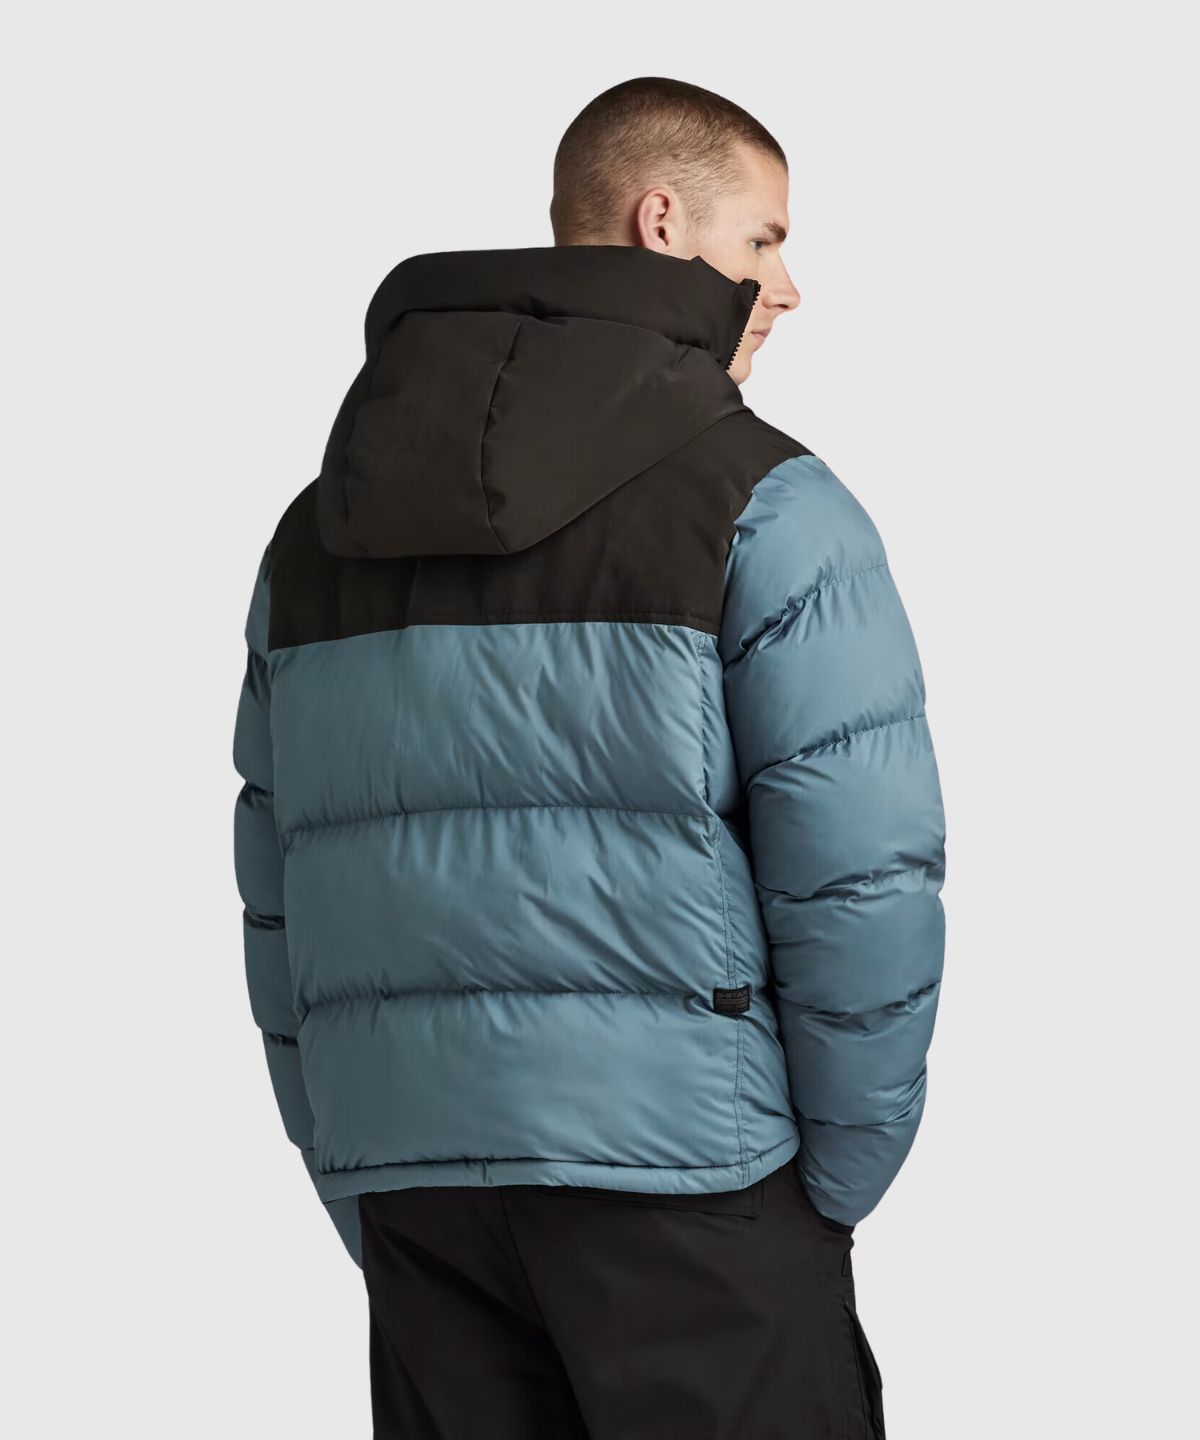 Expedition puffer